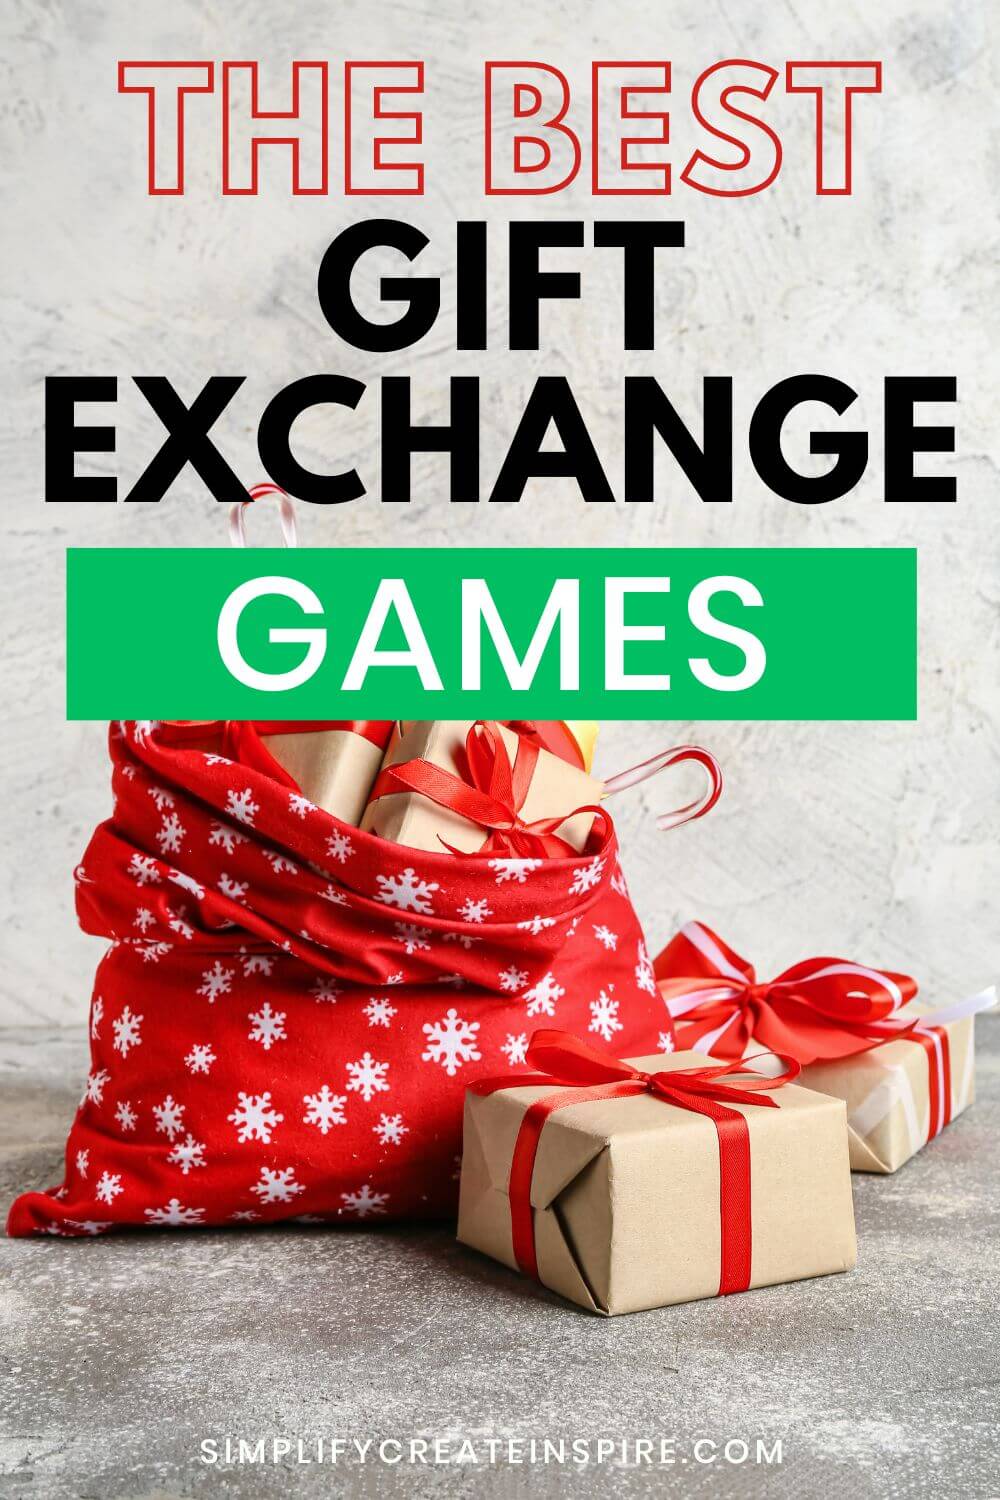 Image of gifts with title the best gift exchange games